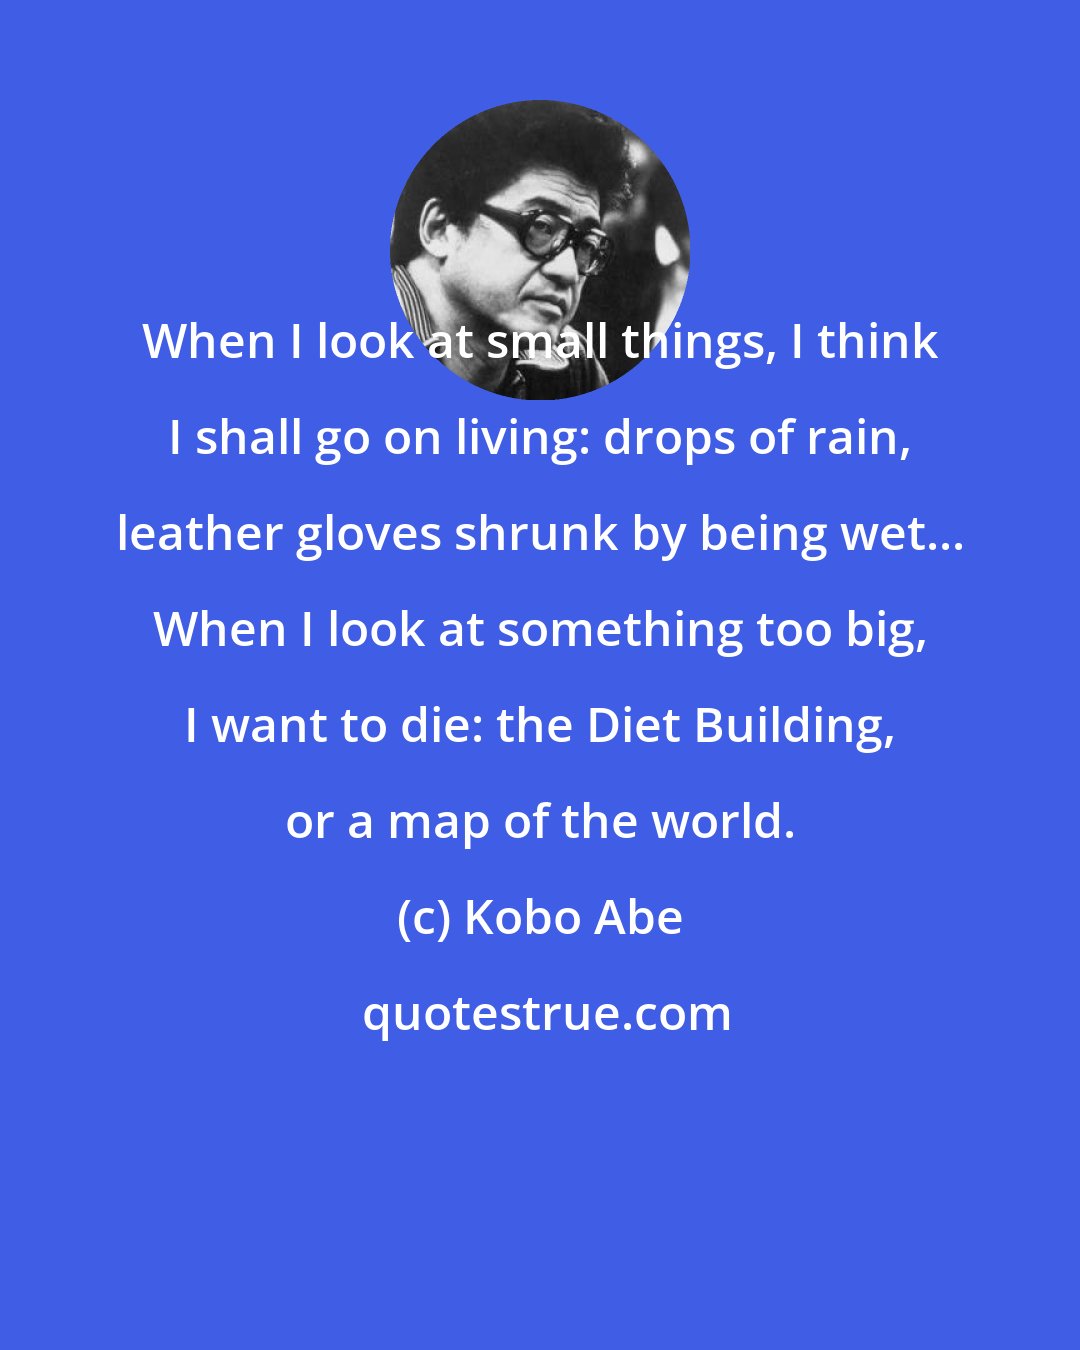 Kobo Abe: When I look at small things, I think I shall go on living: drops of rain, leather gloves shrunk by being wet... When I look at something too big, I want to die: the Diet Building, or a map of the world.